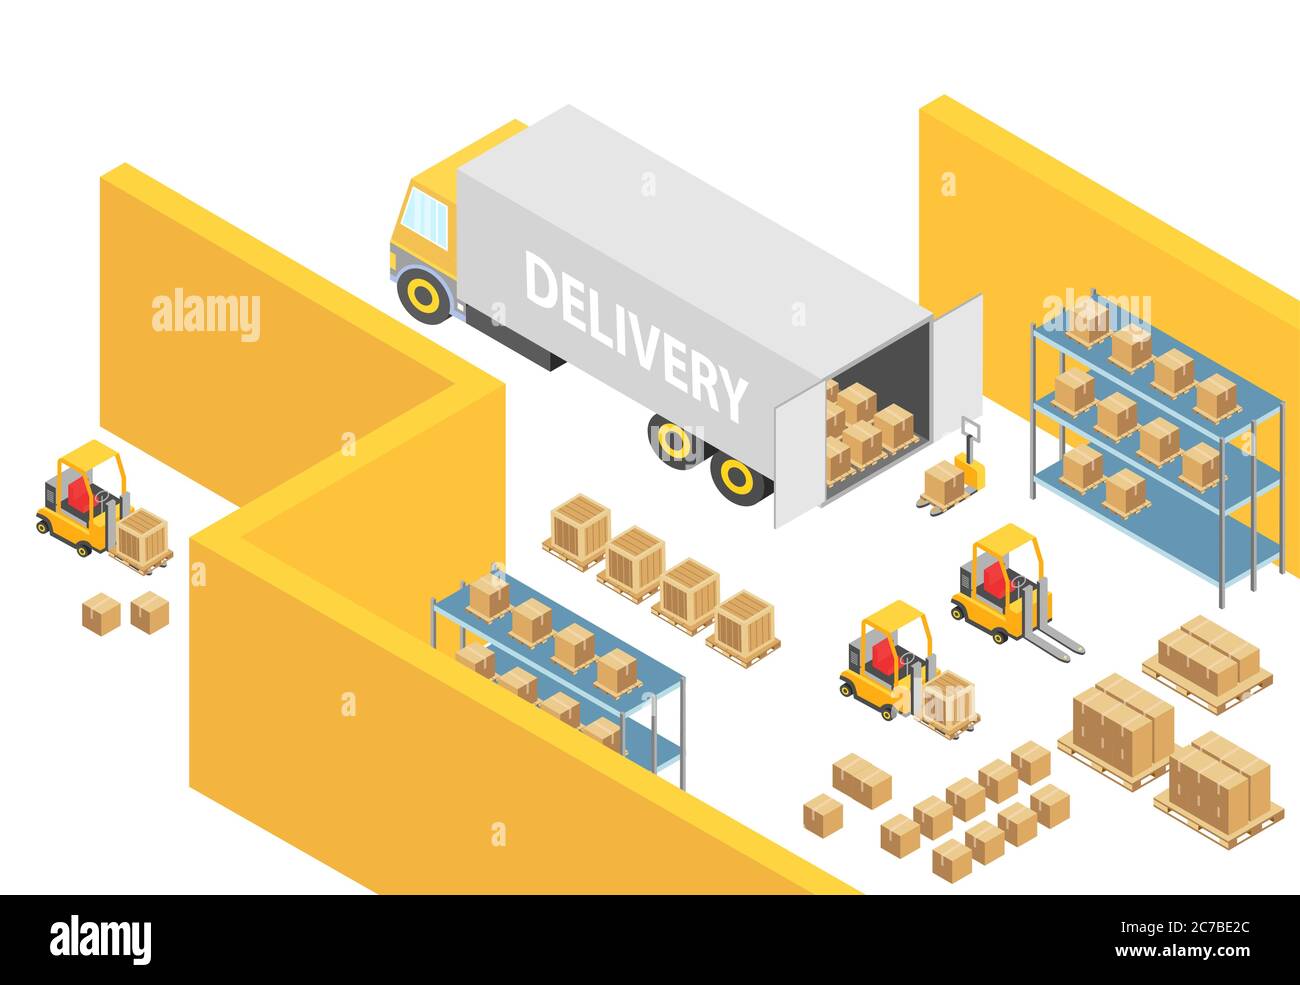 Warehouse isometric 3D warehouse interior map illustration with logistics transport and delivery vehicles. Loader forklift trucks, people and delivery boxes. Cargo company infographic vector template Stock Vector